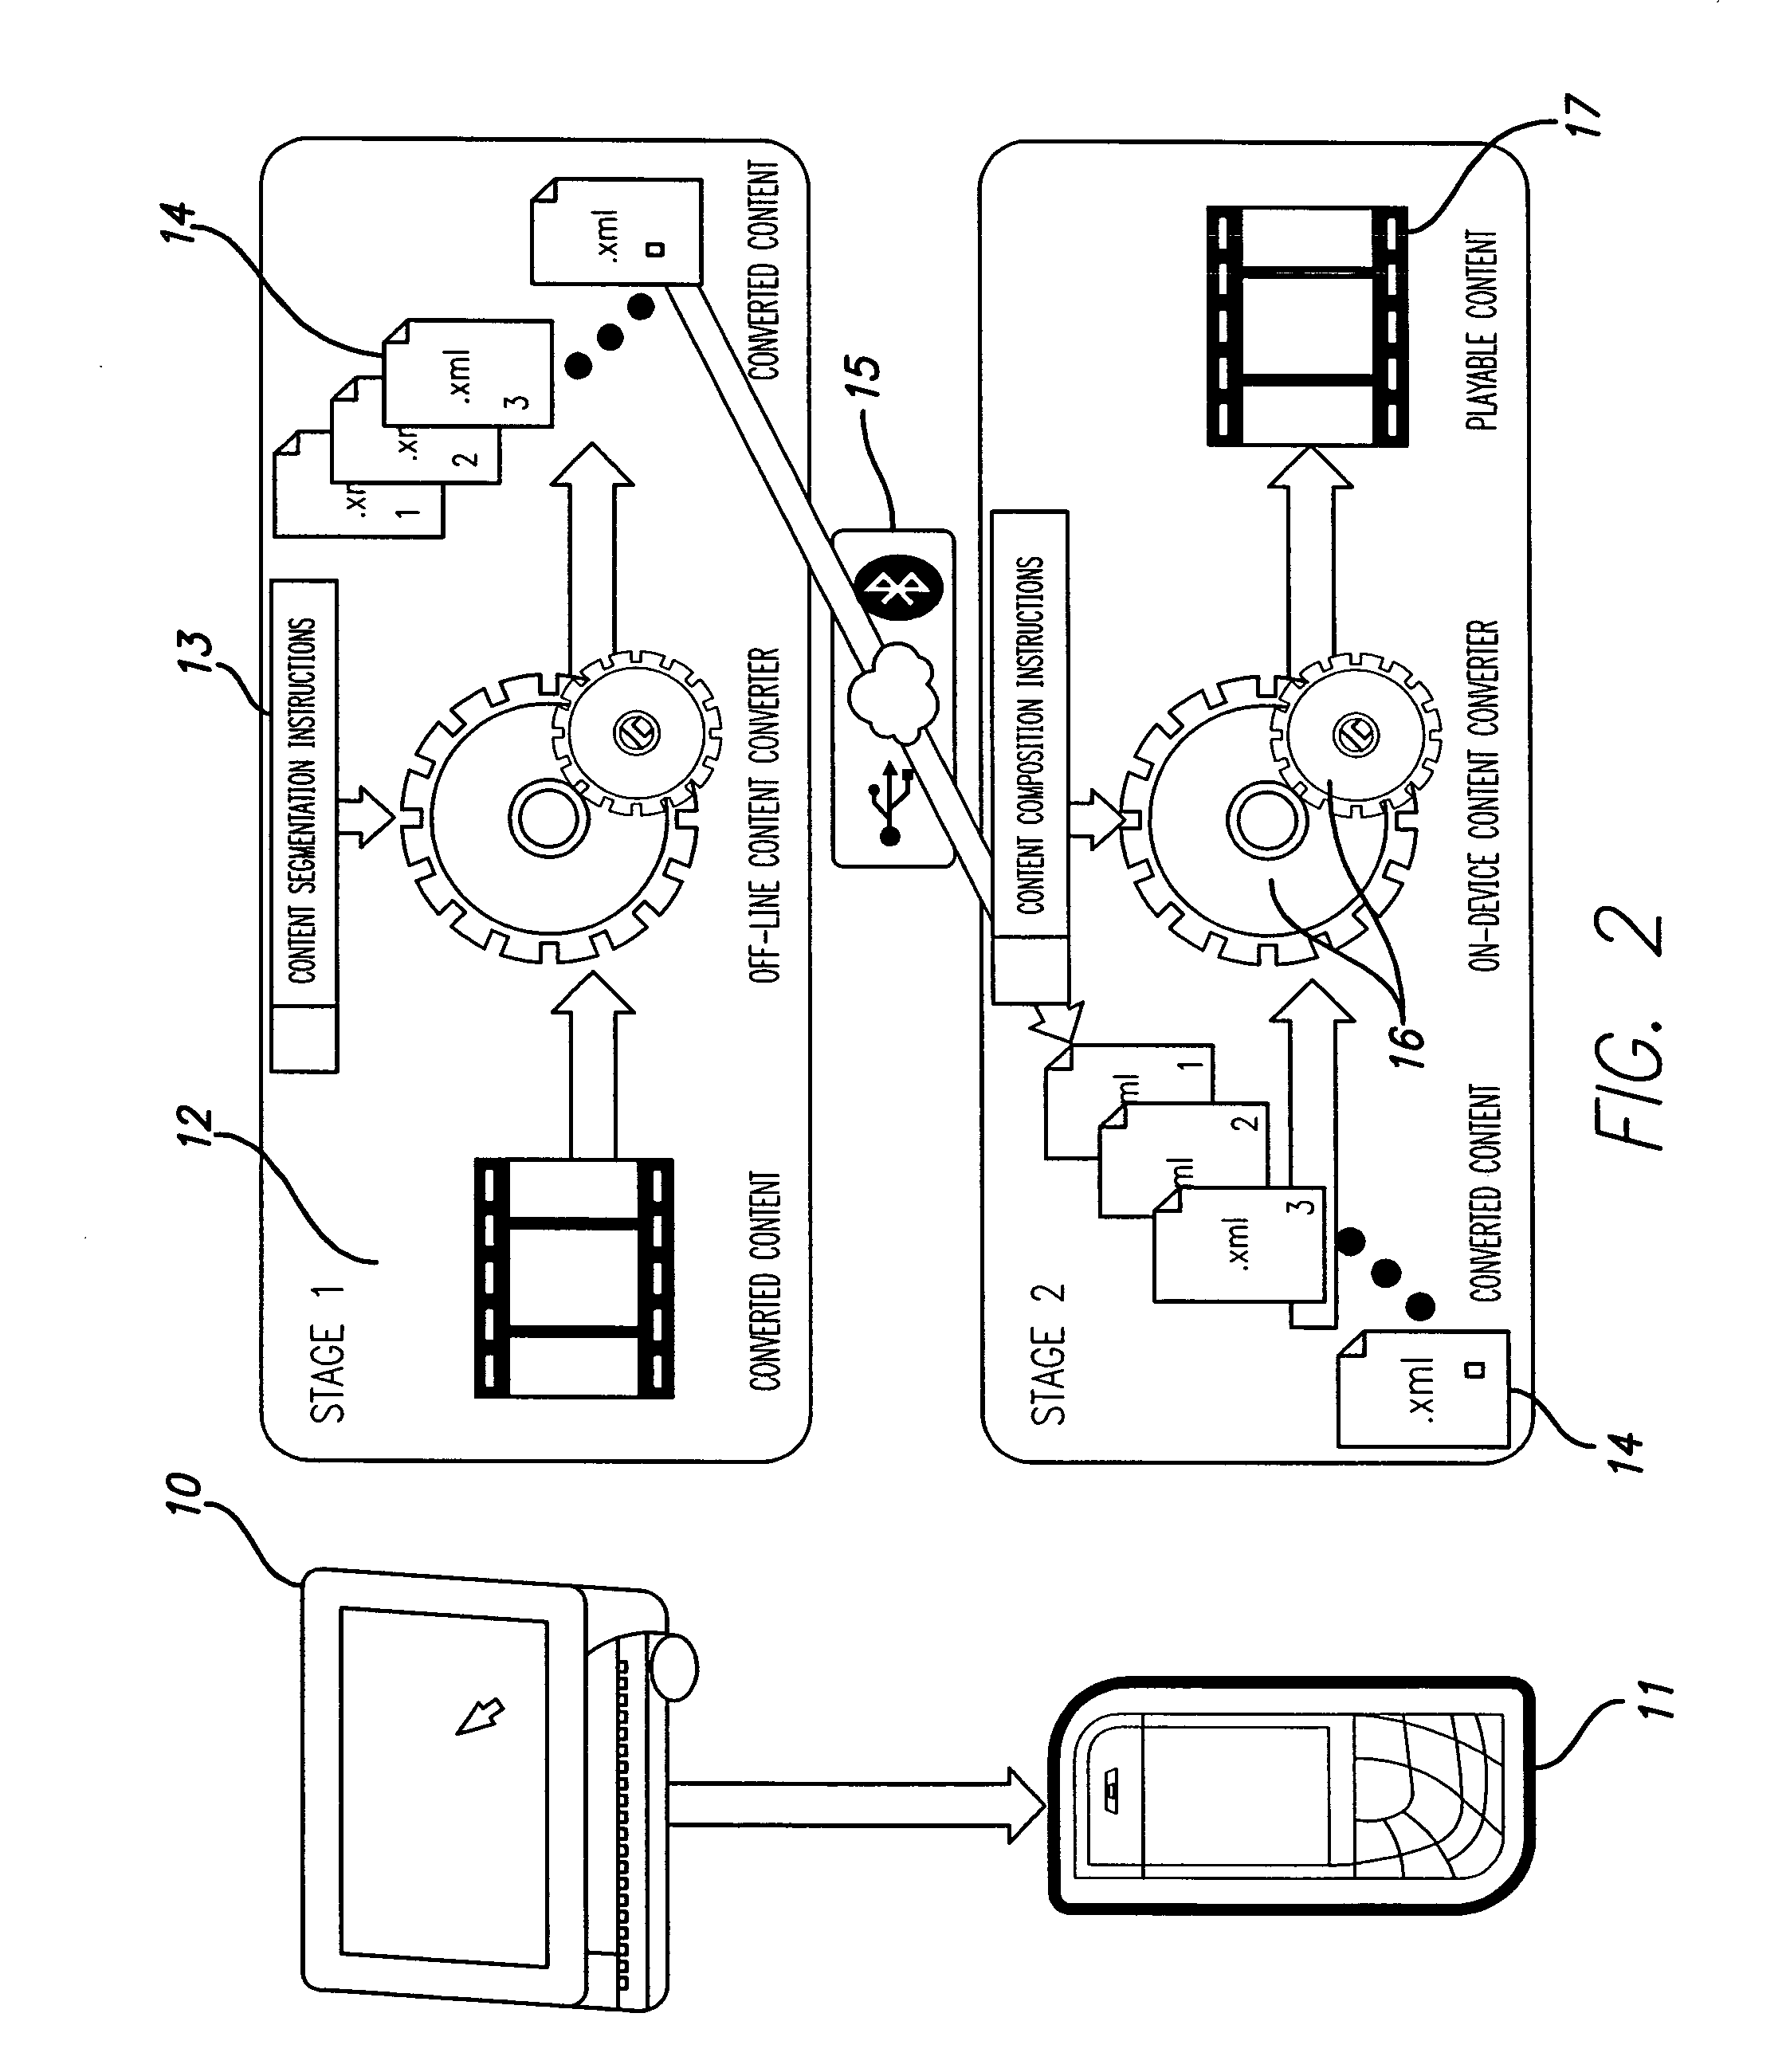 System and method for delivery of content to mobile devices